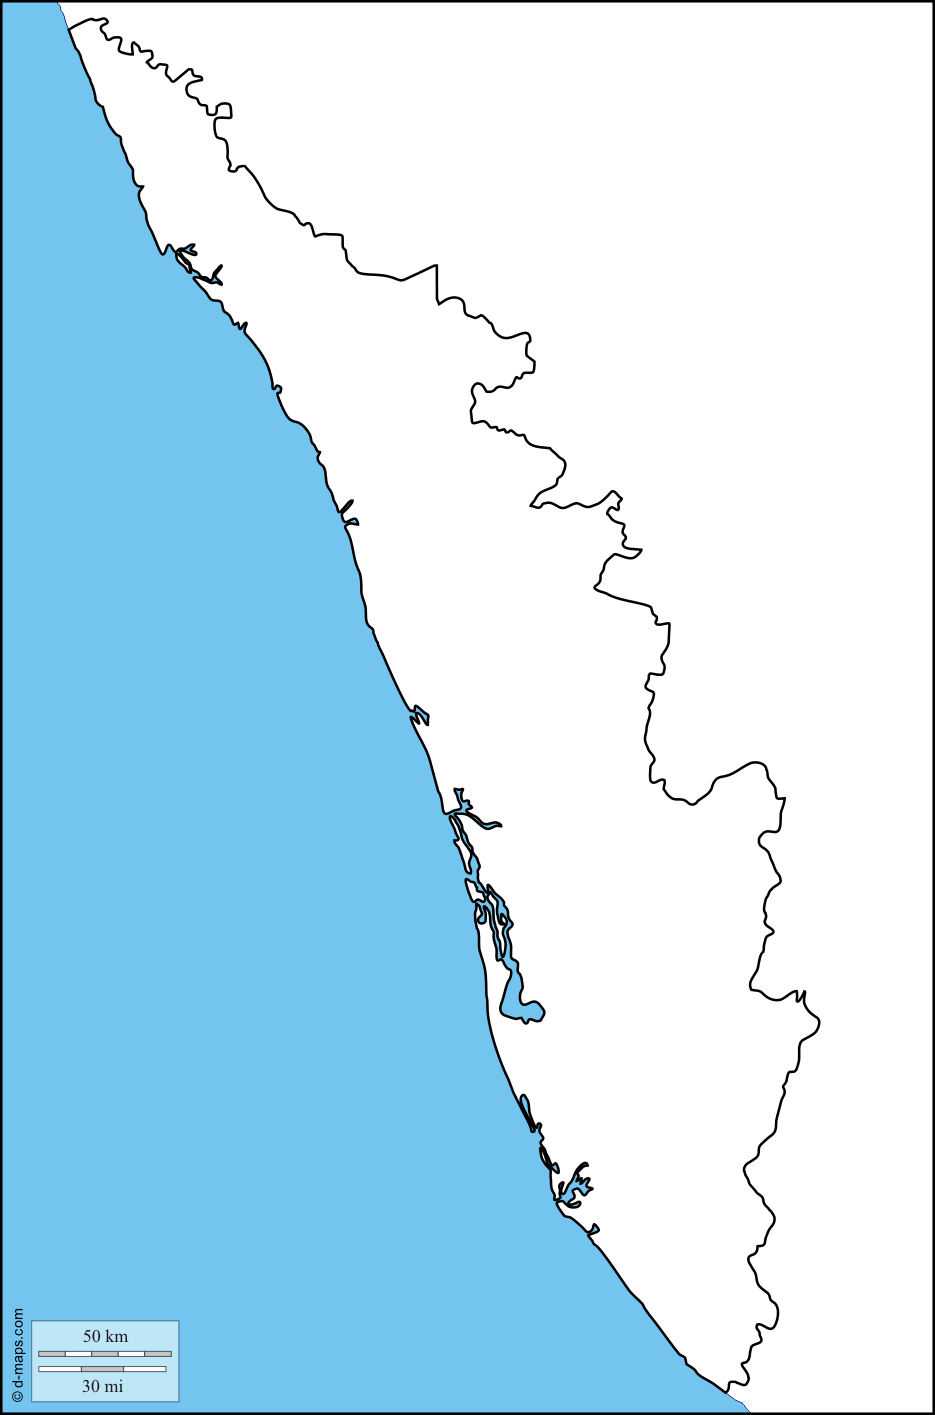 Kerala, free map, free blank map, free outline map, free base map, coasts, limits. Map sketch, Map outline, Free maps